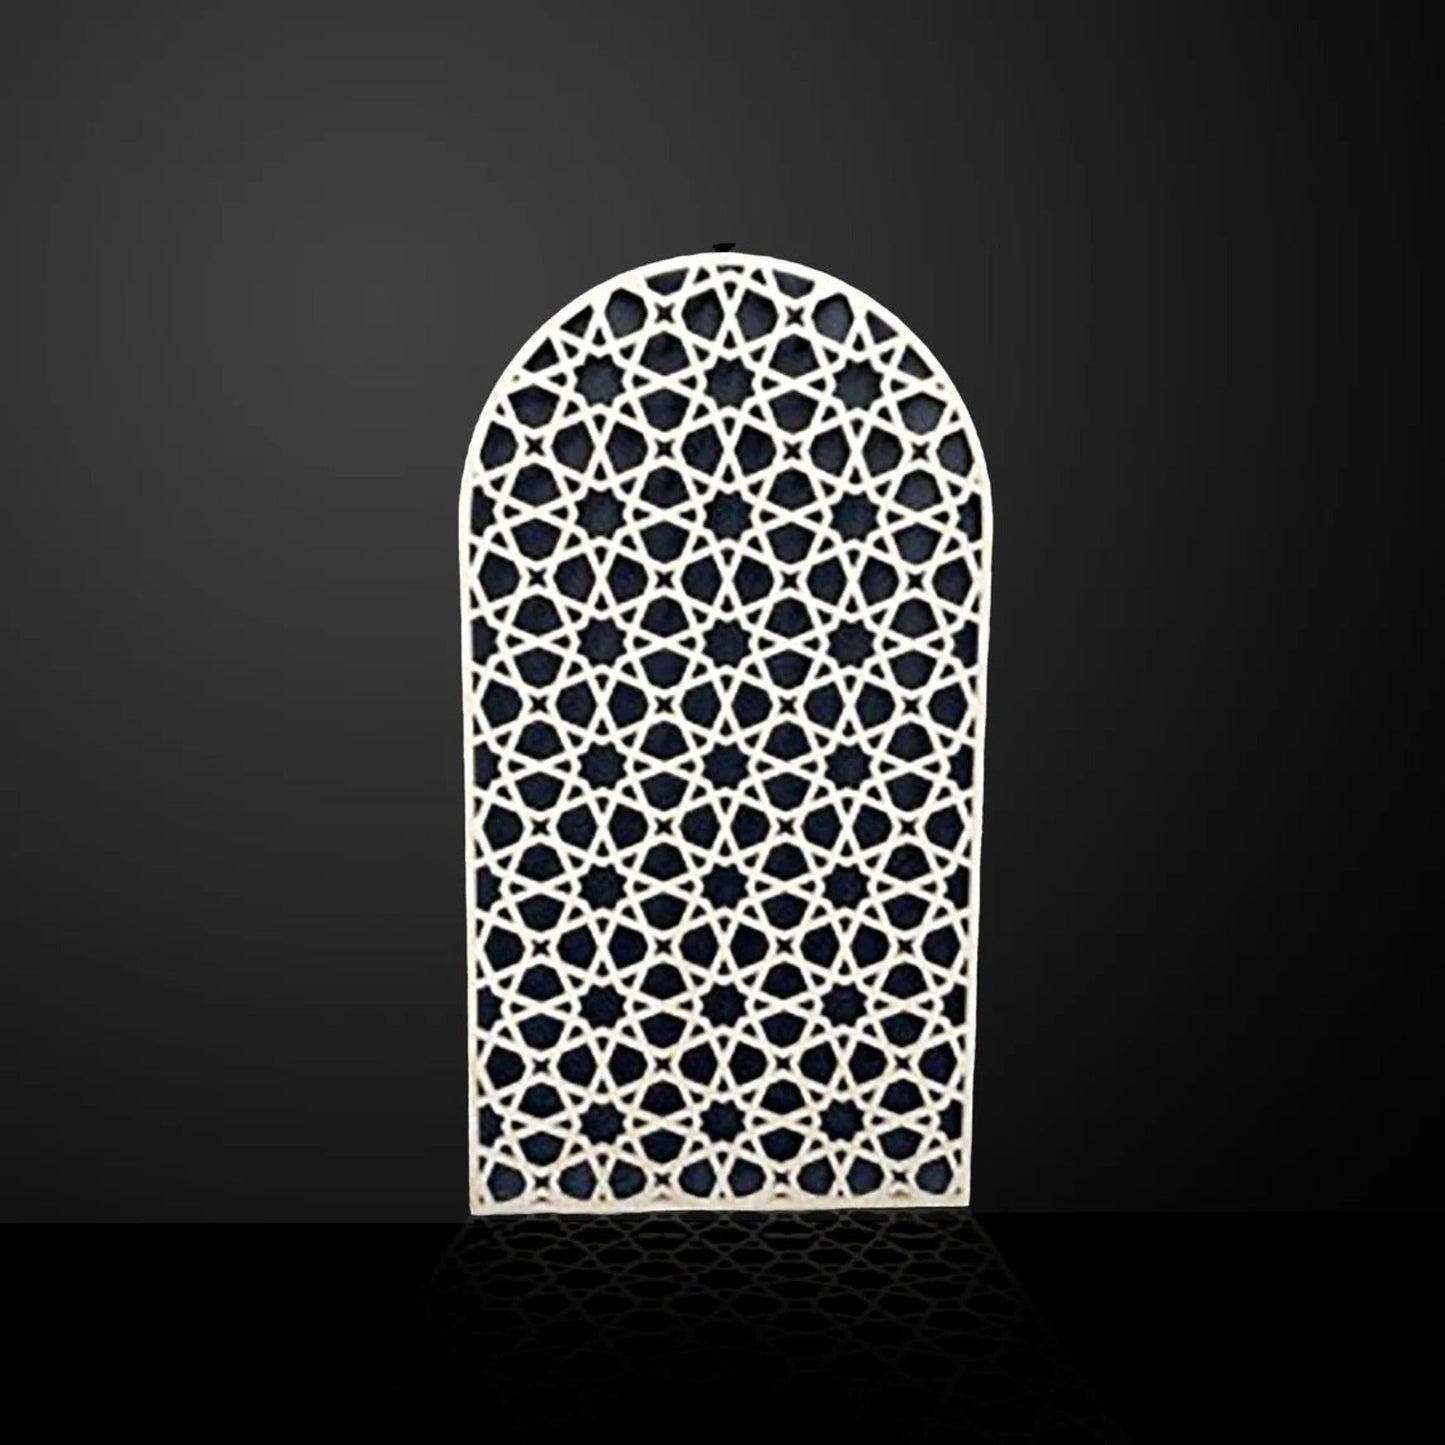 Mihrab, Islamic panels, Mosque partition, Mosque separator, custom panel, room divider, room dividers , craftivaart,  Arc panel , Islamic divider, Islamic design, Masjid divider, mosque panel, Islamic room divider, Arc divider design, arc  